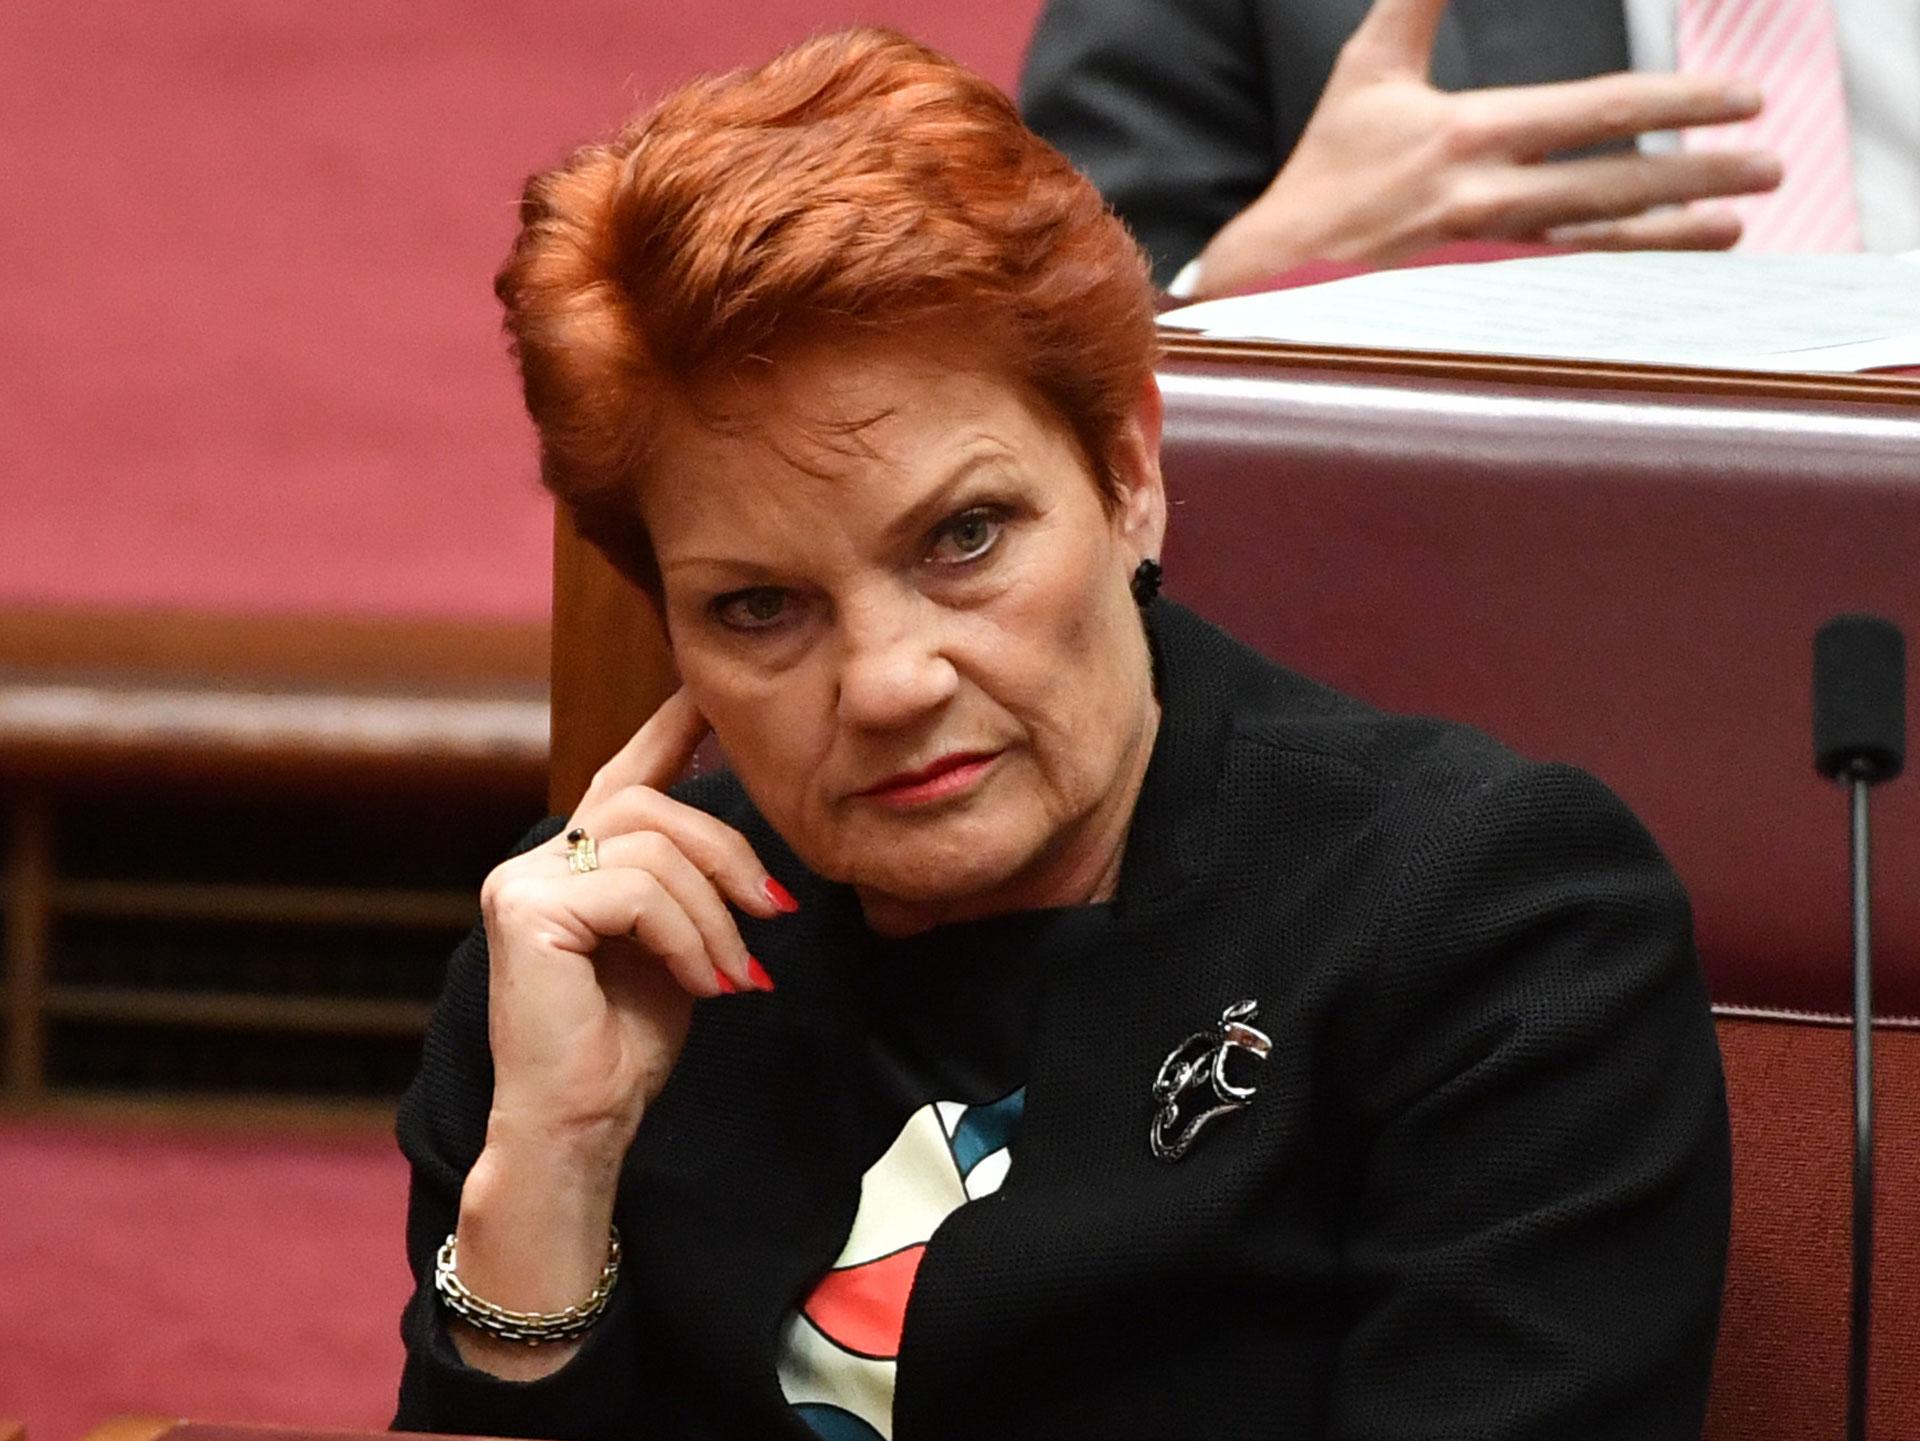 Australian politician Pauline Hanson wants to ‘get rid of’ autistic children from mainstream classrooms